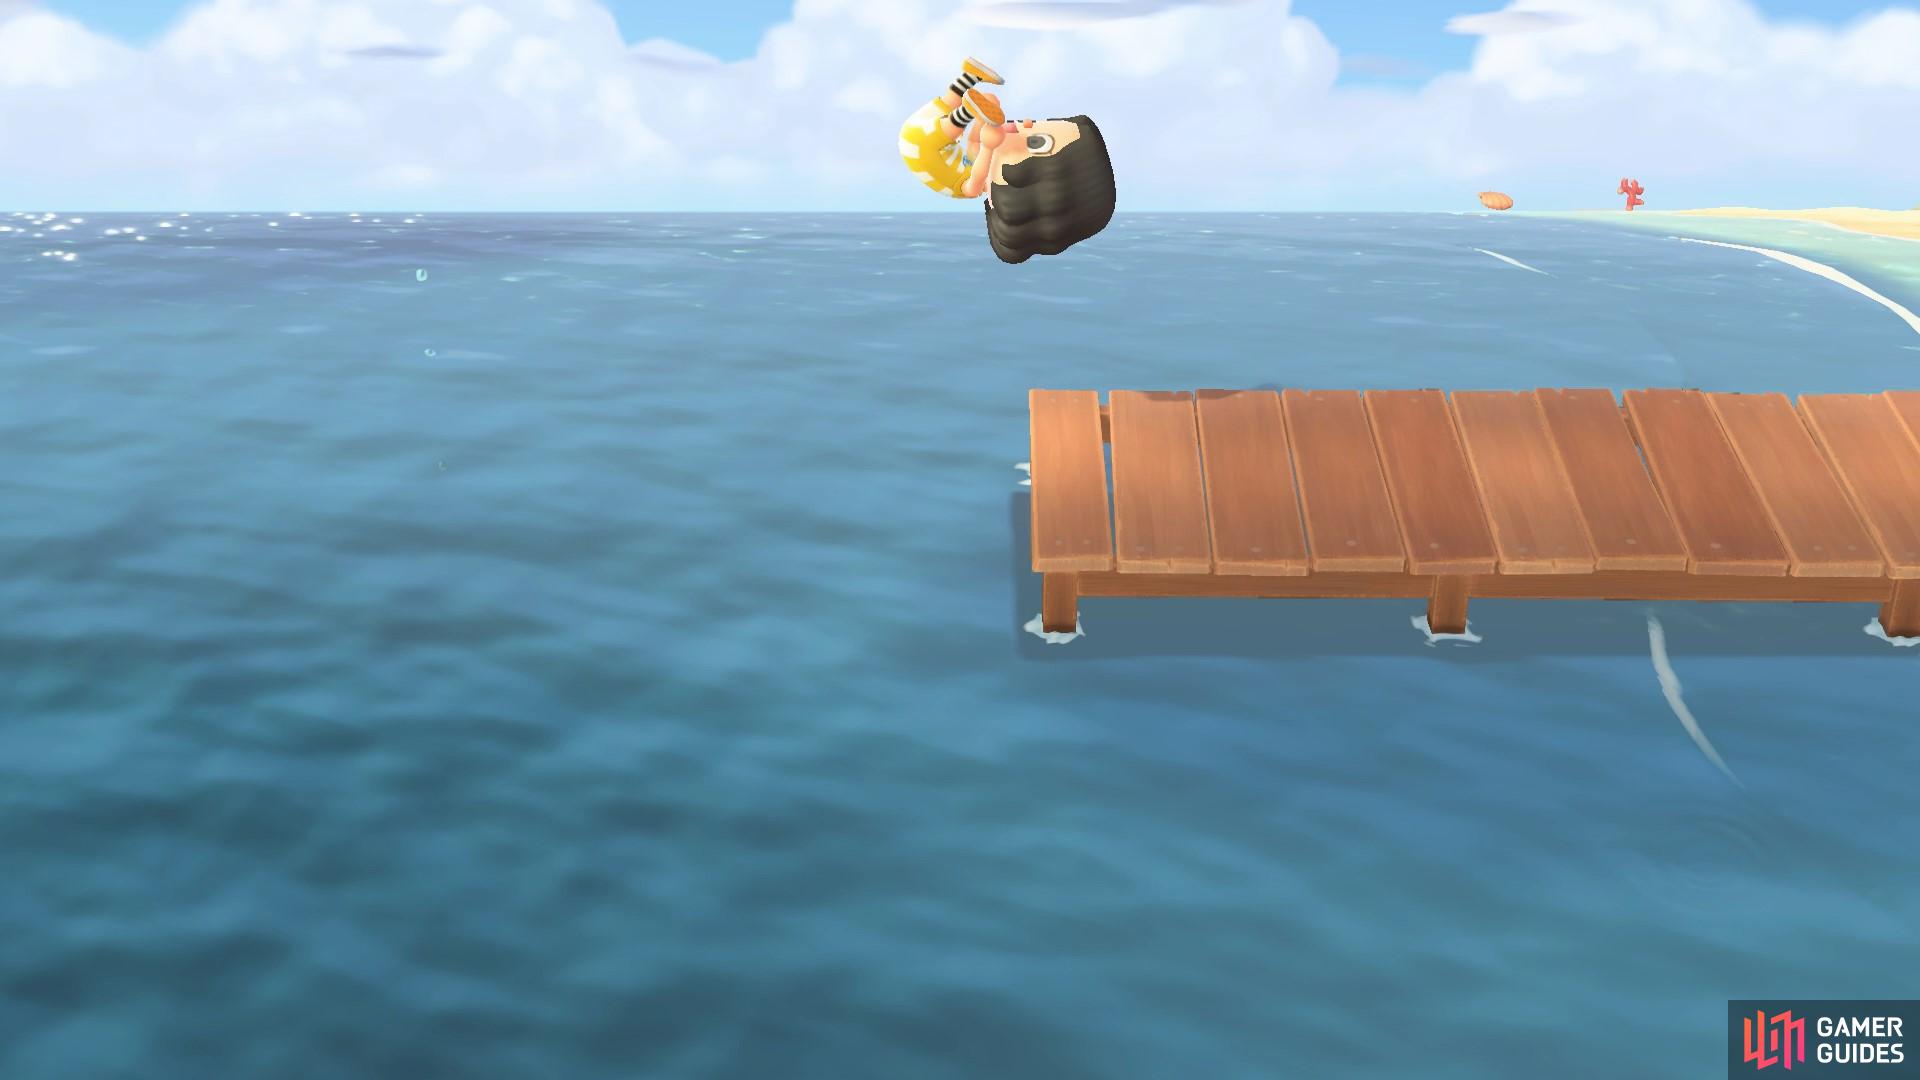 Did you know that if you run and jump off a pier you’ll do a flip?